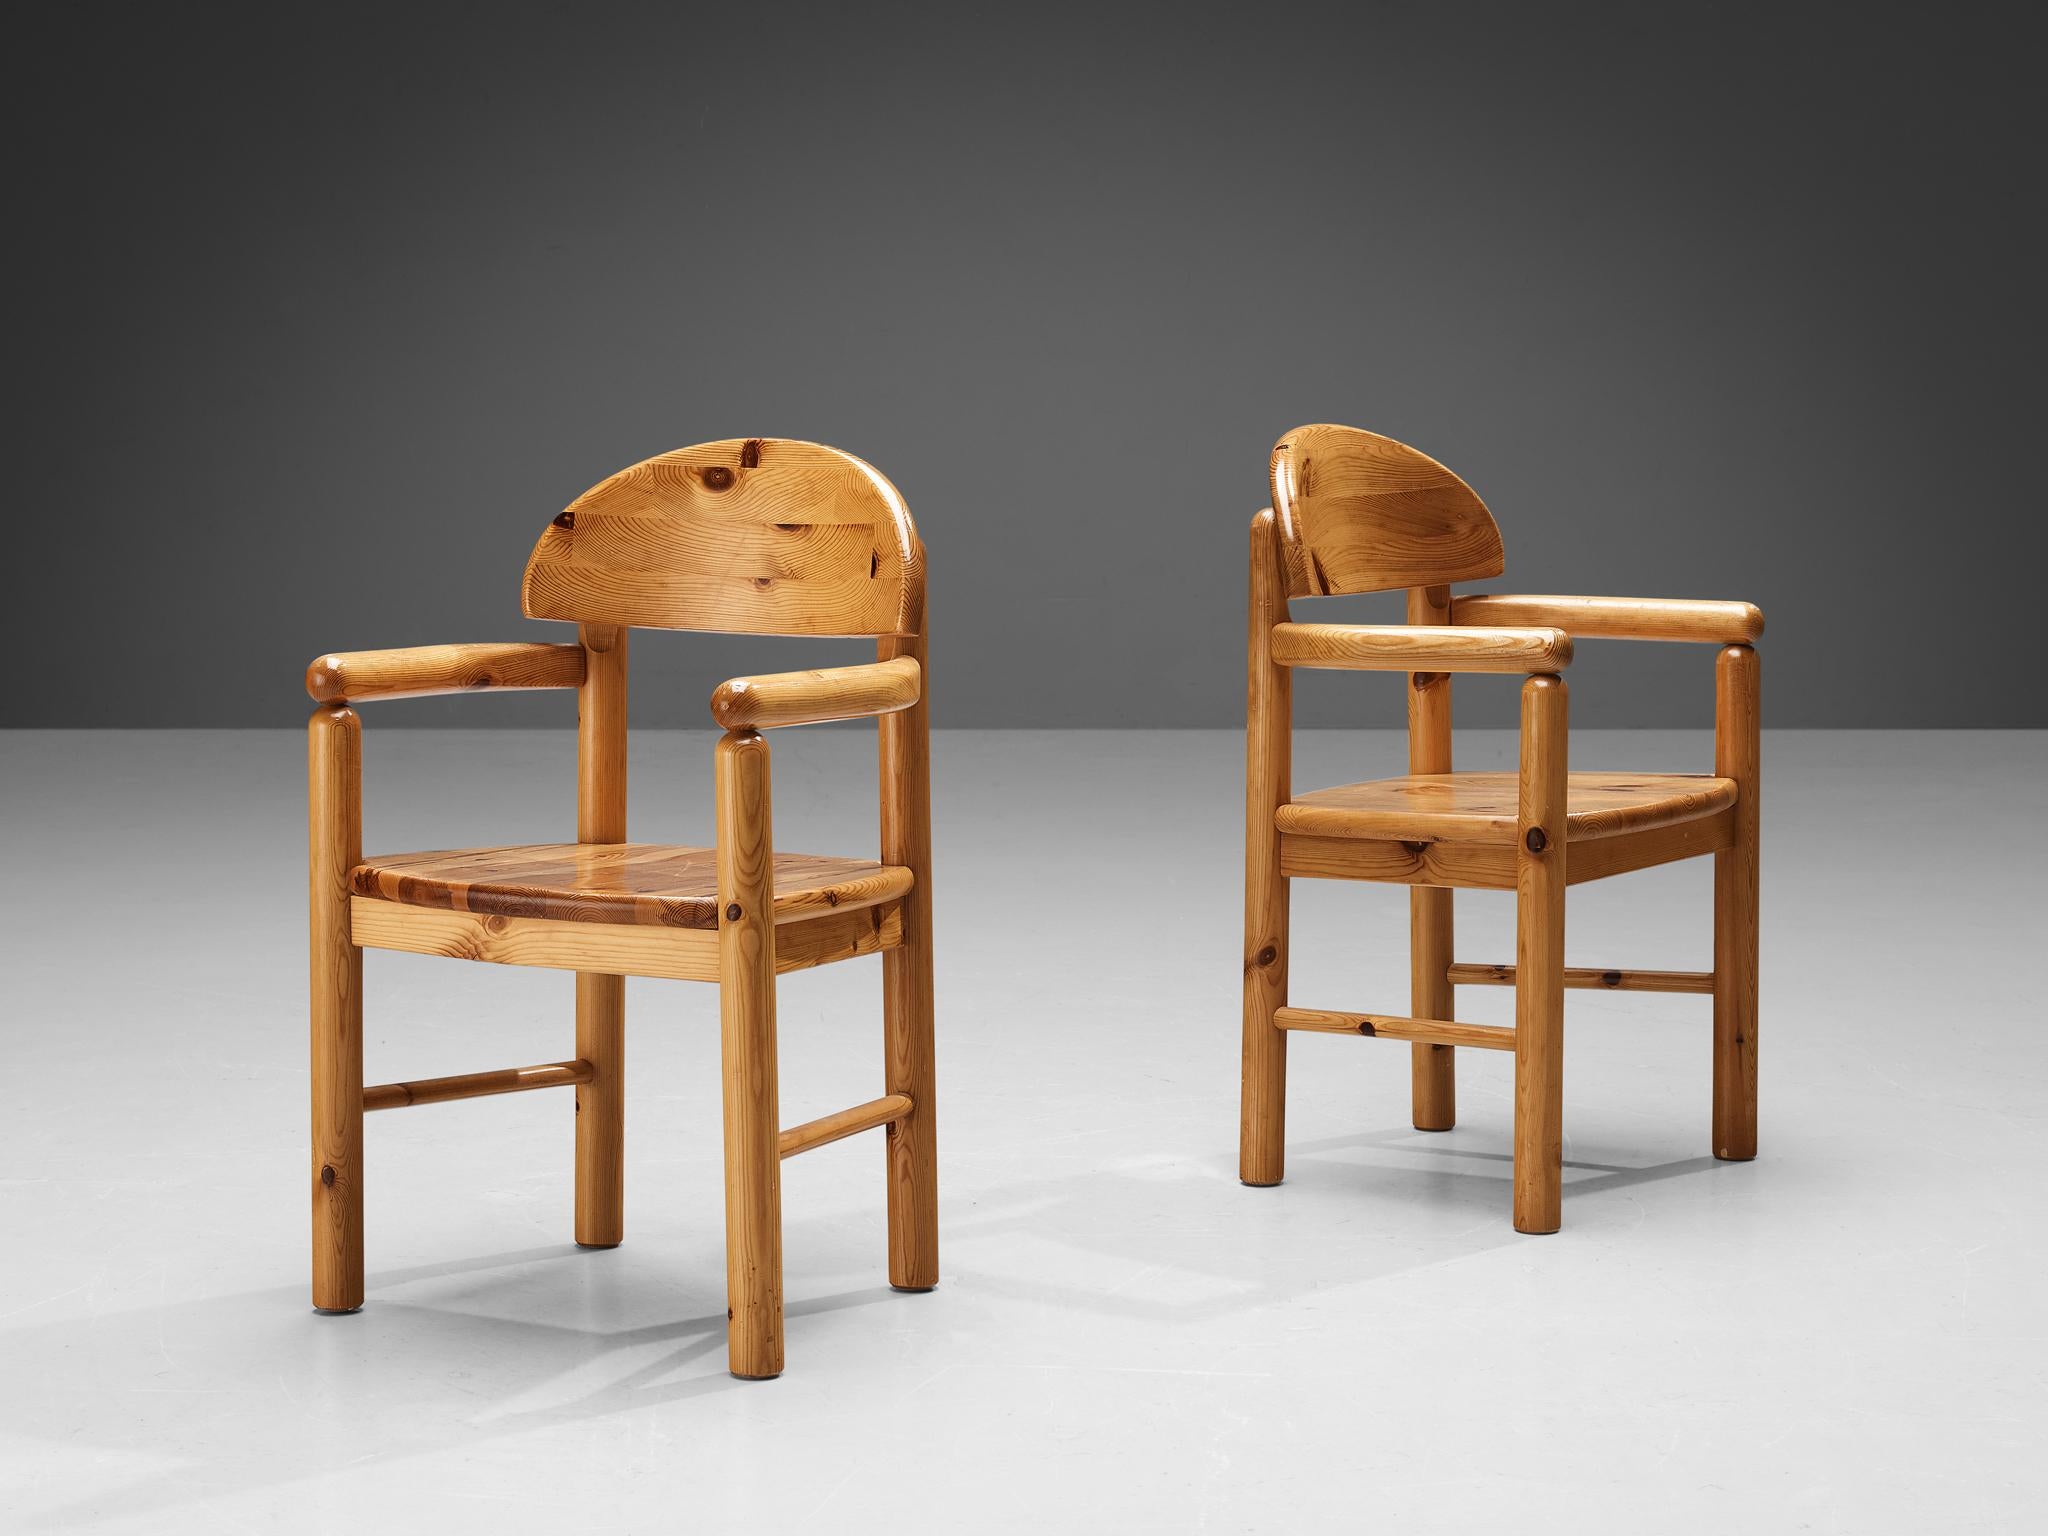 Rainer Daumiller for Hirtshals Sawmill, pair of dining chairs, pine, Denmark, 1970s

This pair of armchairs by Danish designer Rainer Daumiller has multiple features. The vivid grain of the warm pine wood contributes to the natural expressiveness of